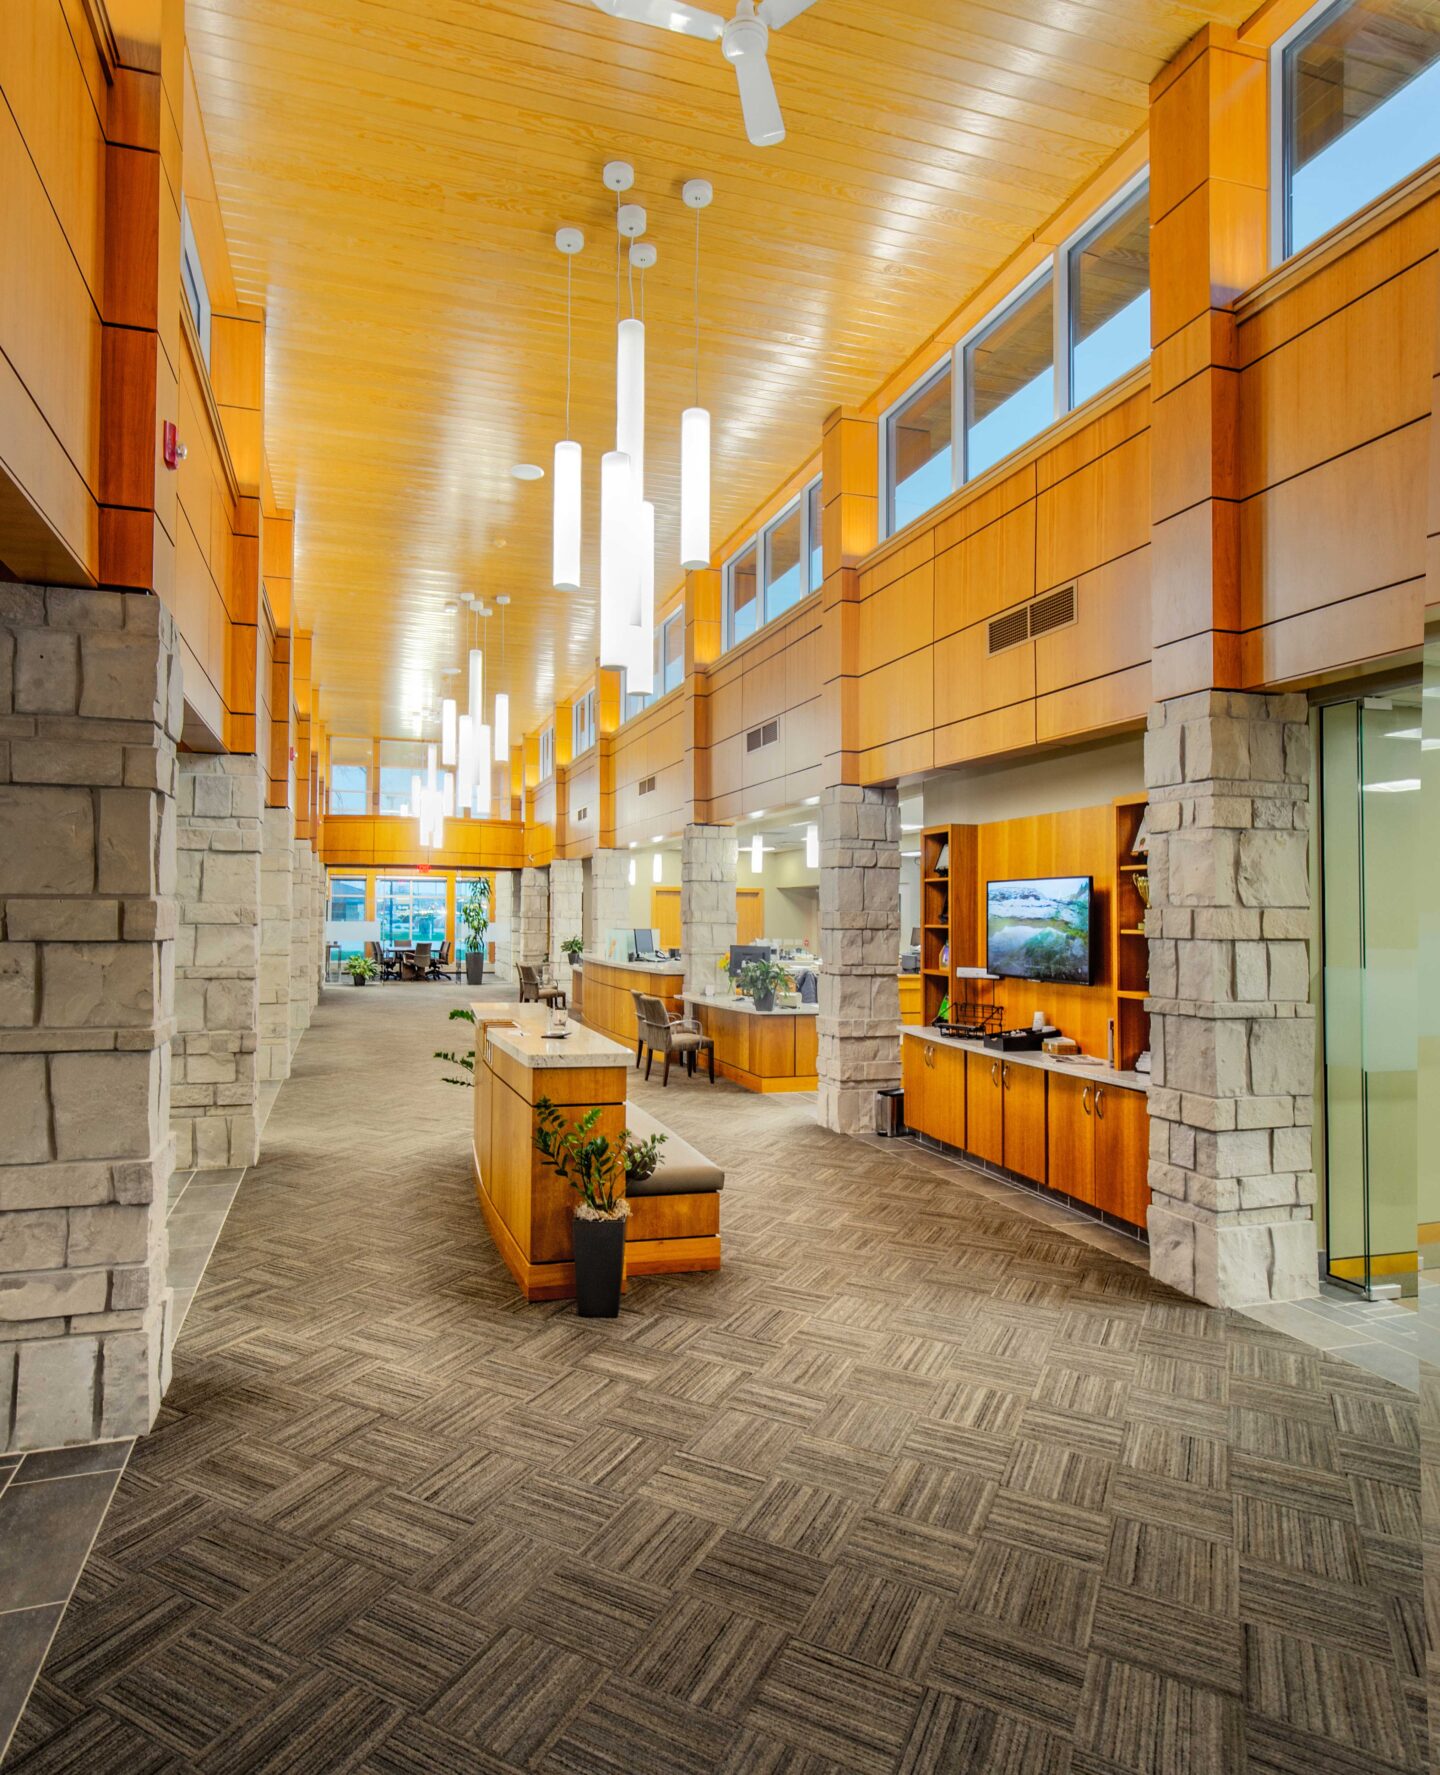 A bank interior with high ceilings and accents of stone and wood